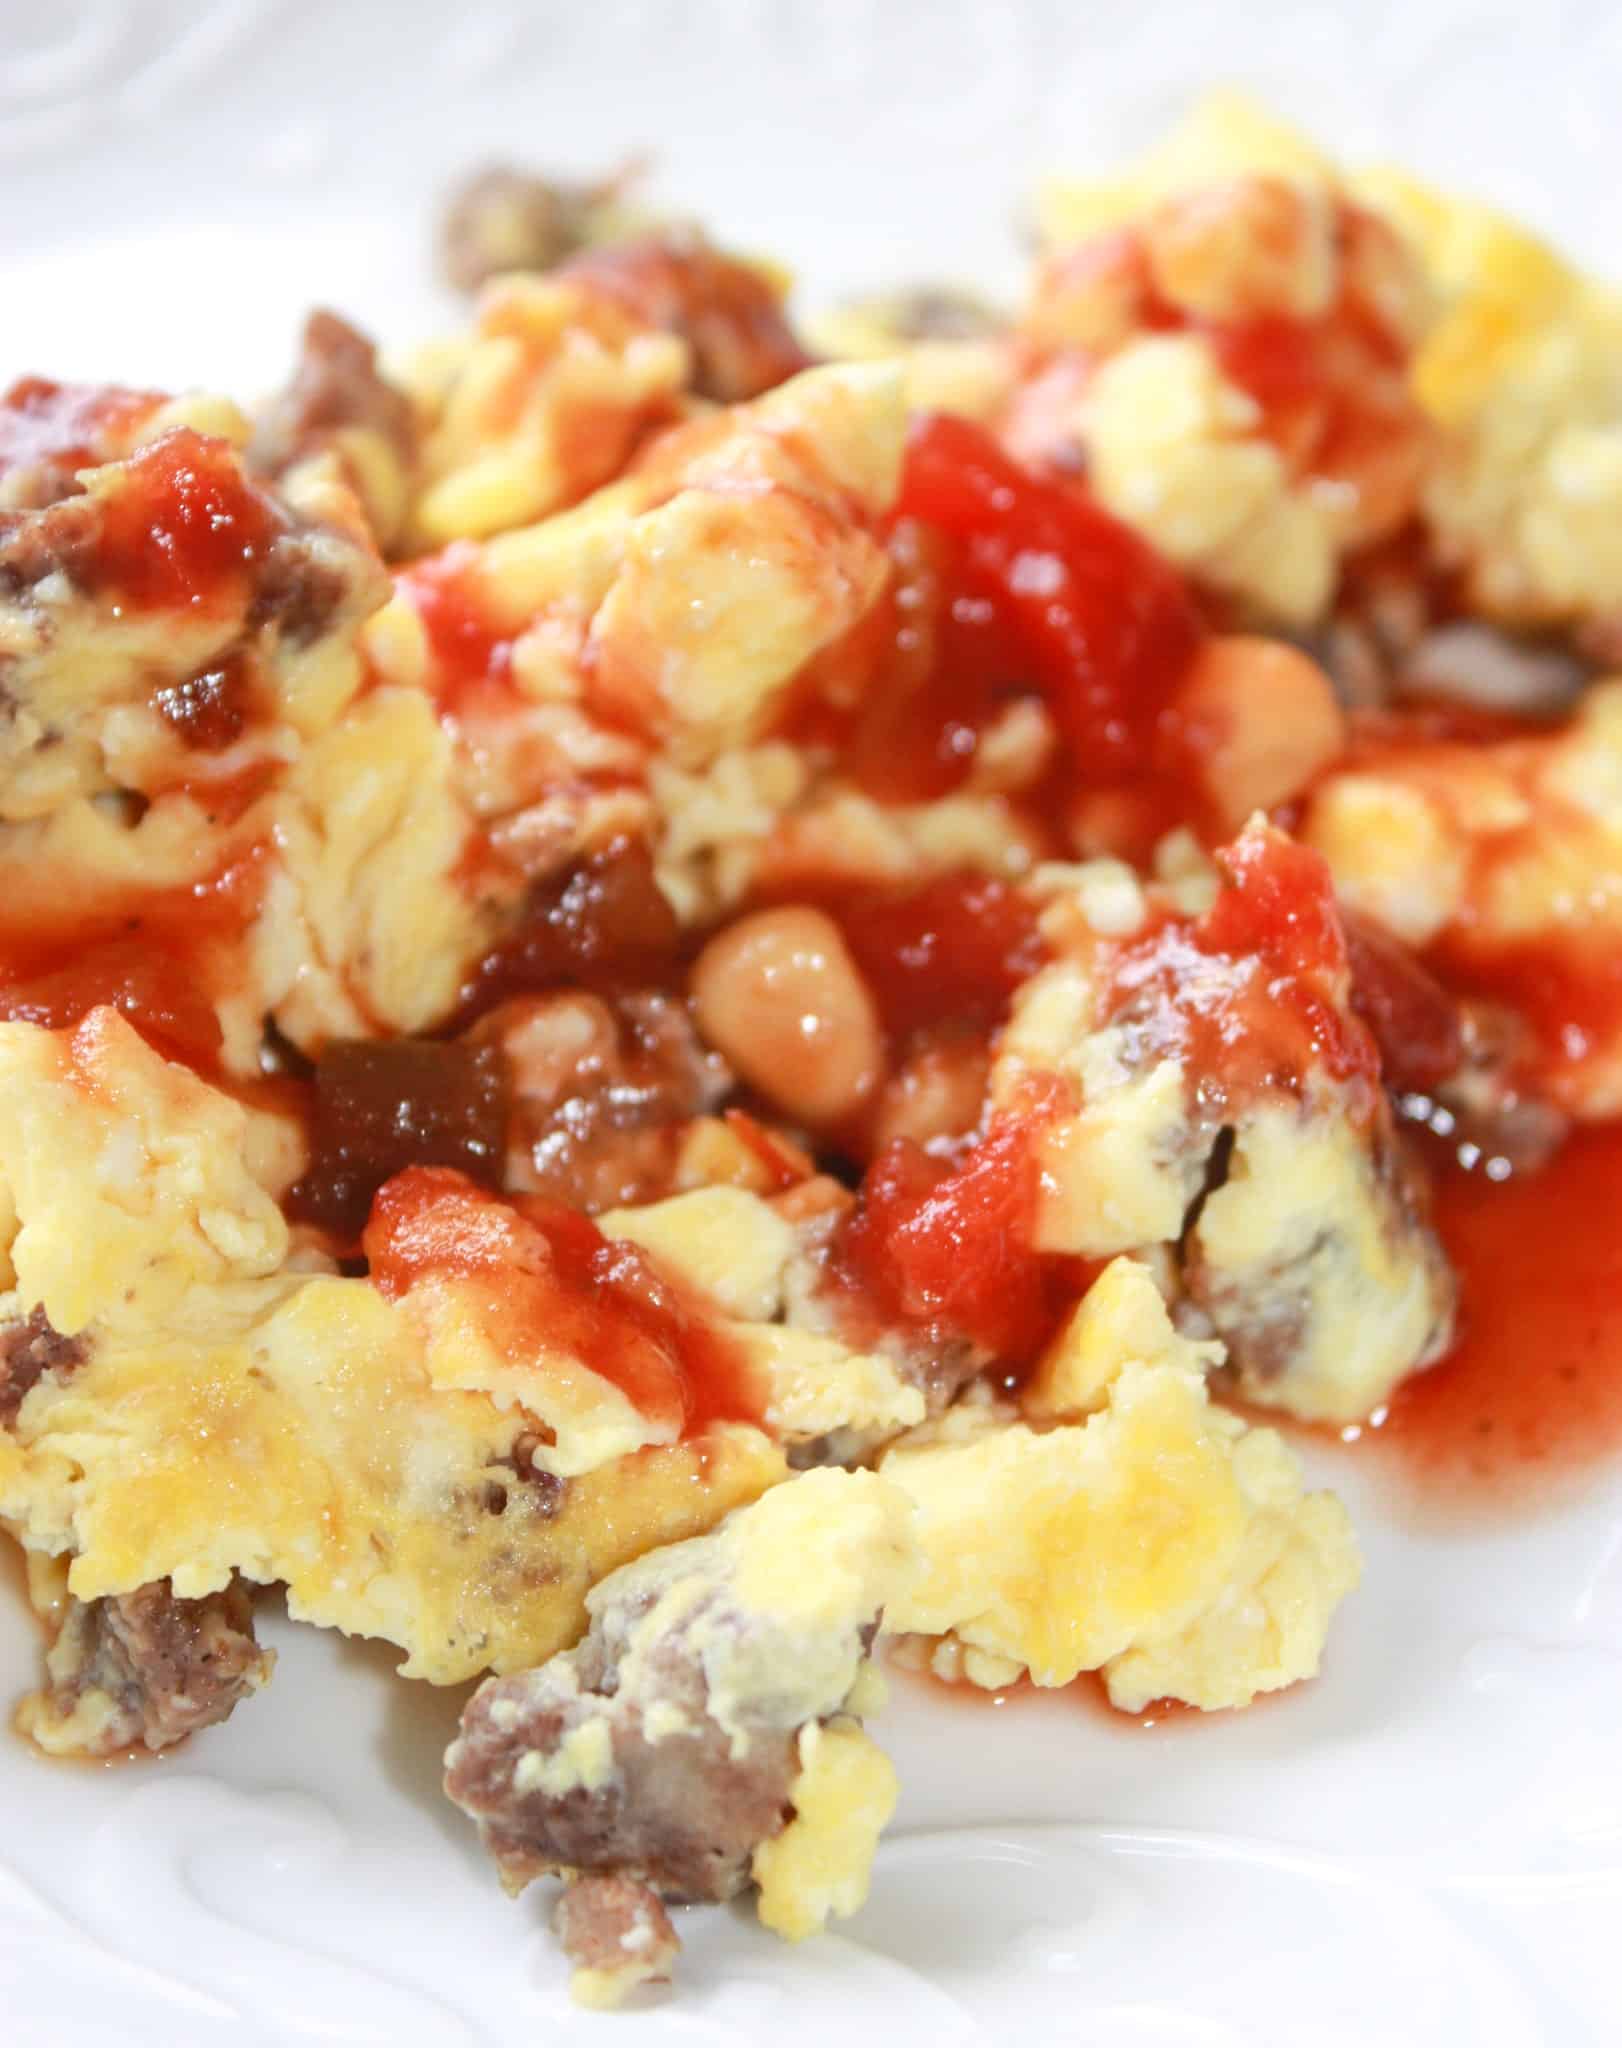 Venison Sausage and Eggs is a very easy recipe for a quick breakfast or lunch.  If you don't have venison on hand you could use any type of gluten free spicy sausage meat.